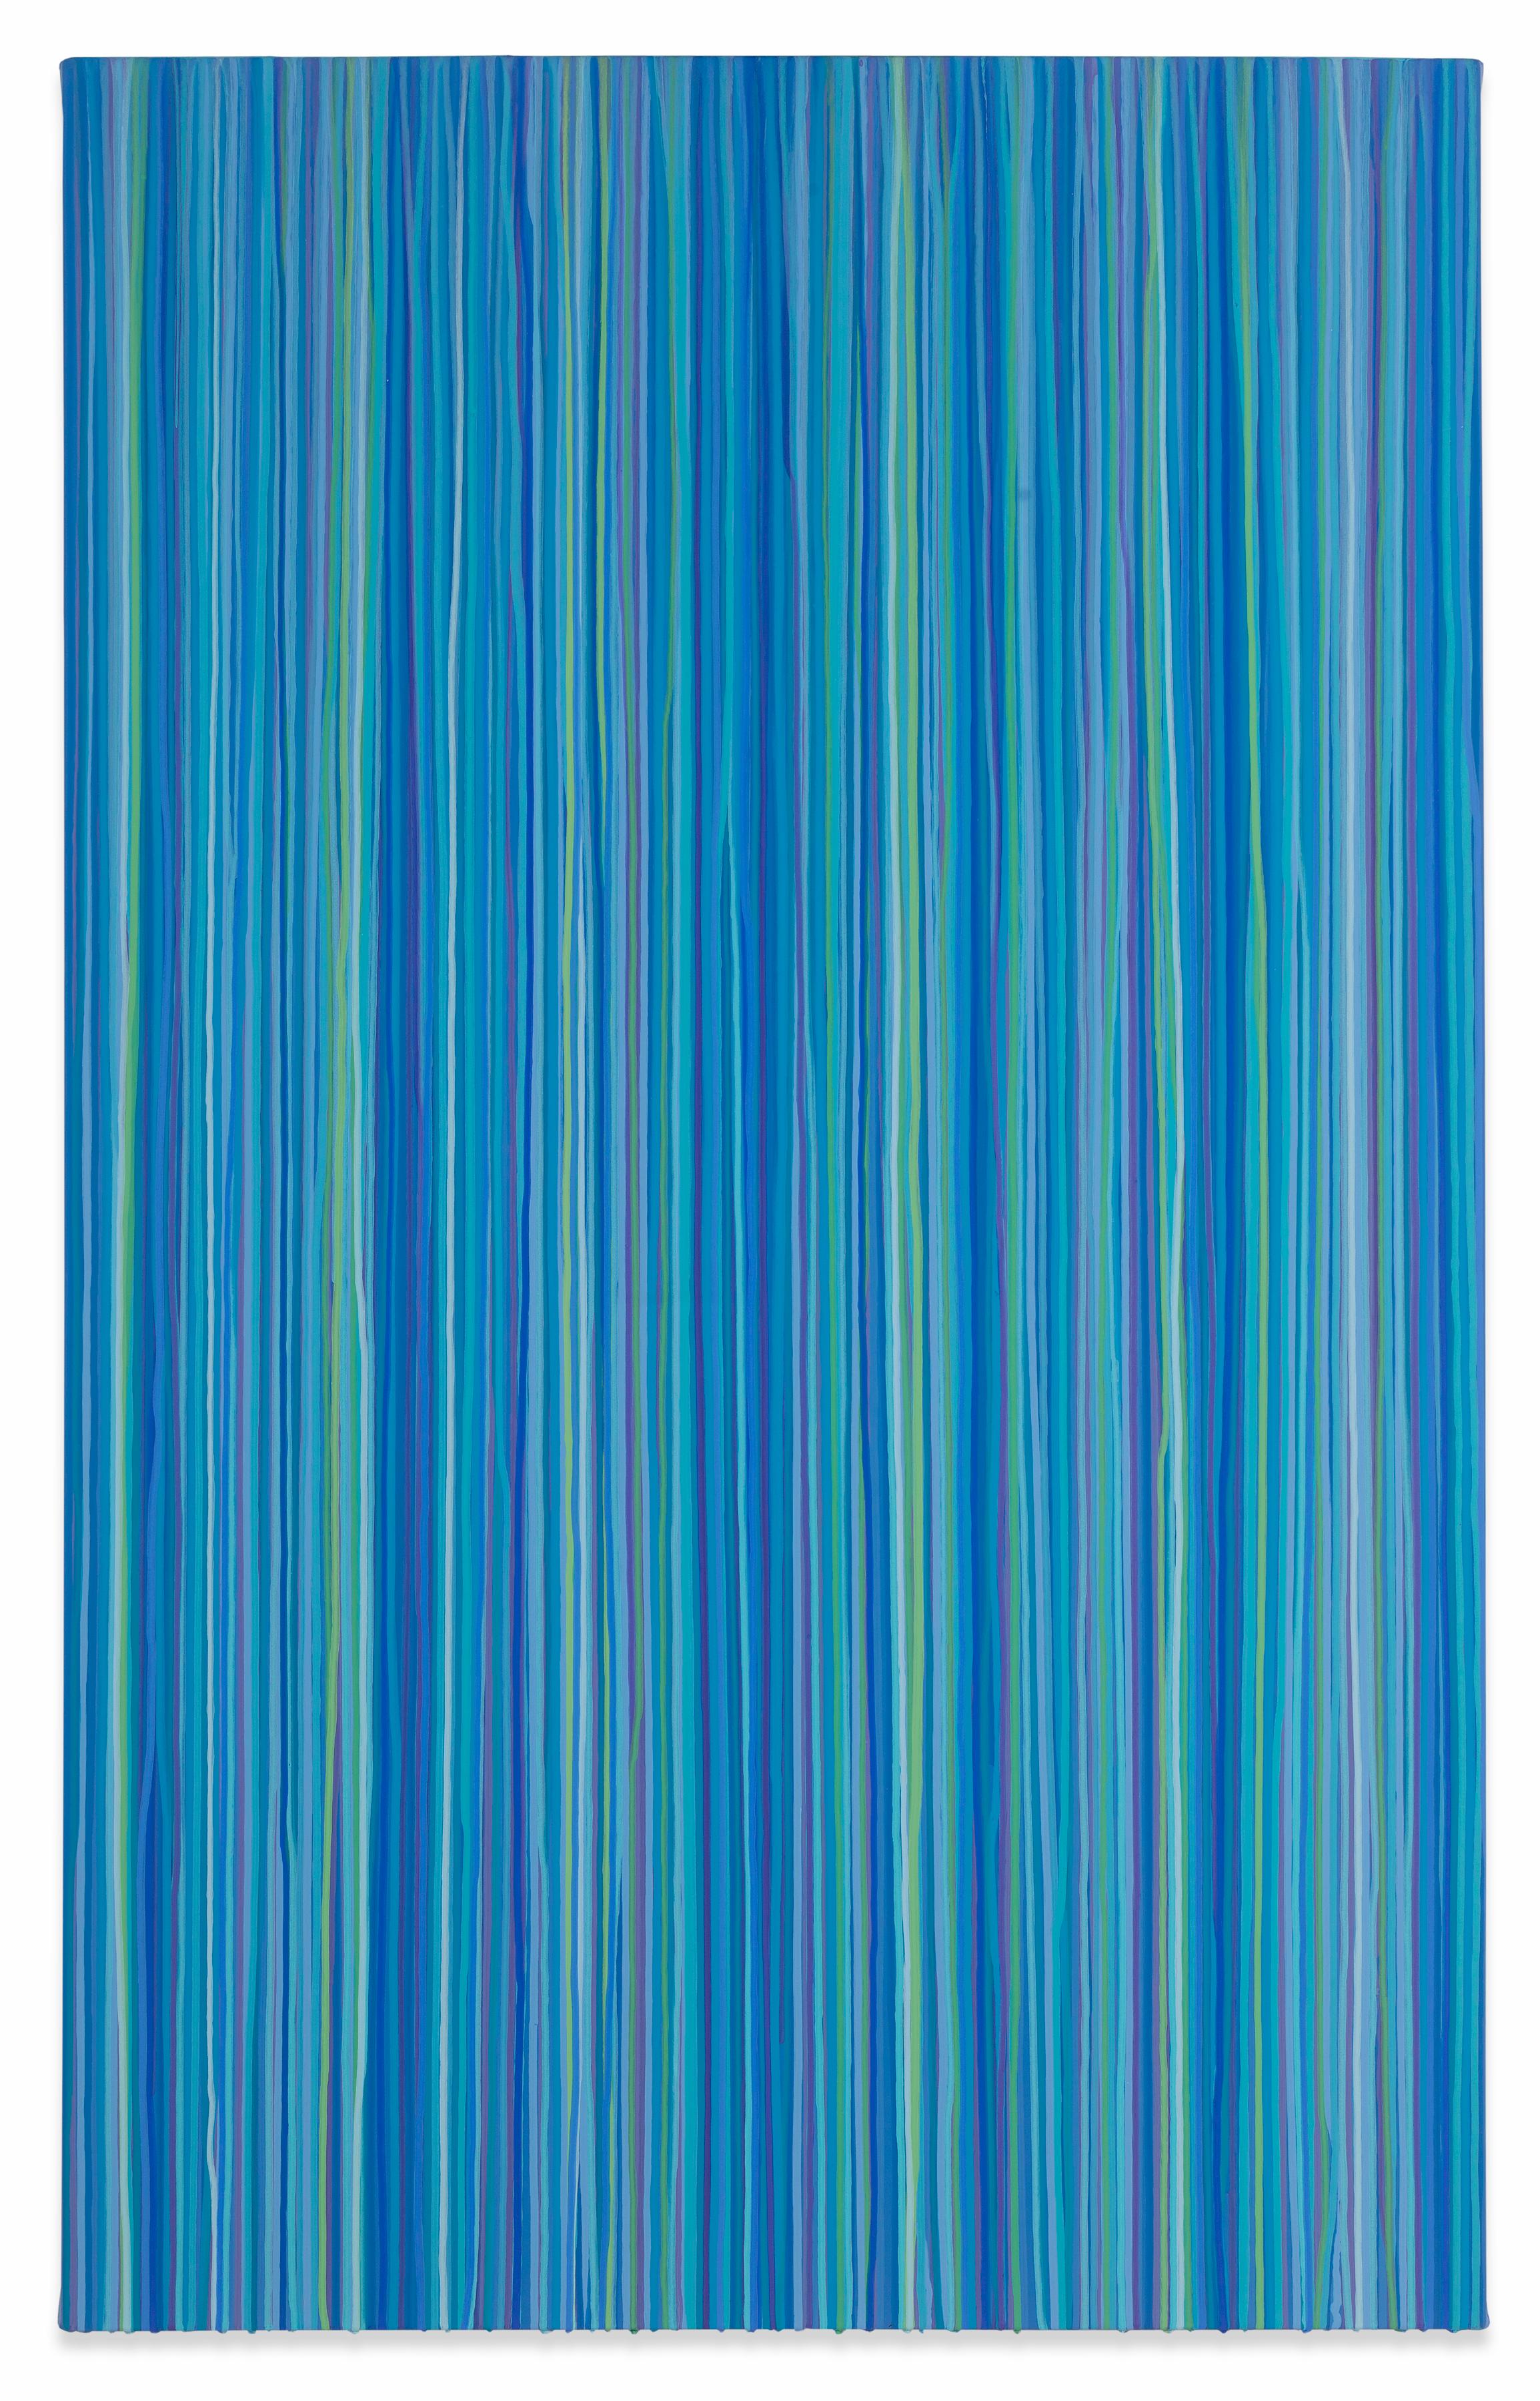 John Guthrie Abstract Painting - "Heart Fog" Contemporary Striped Painting in Blue and Green 